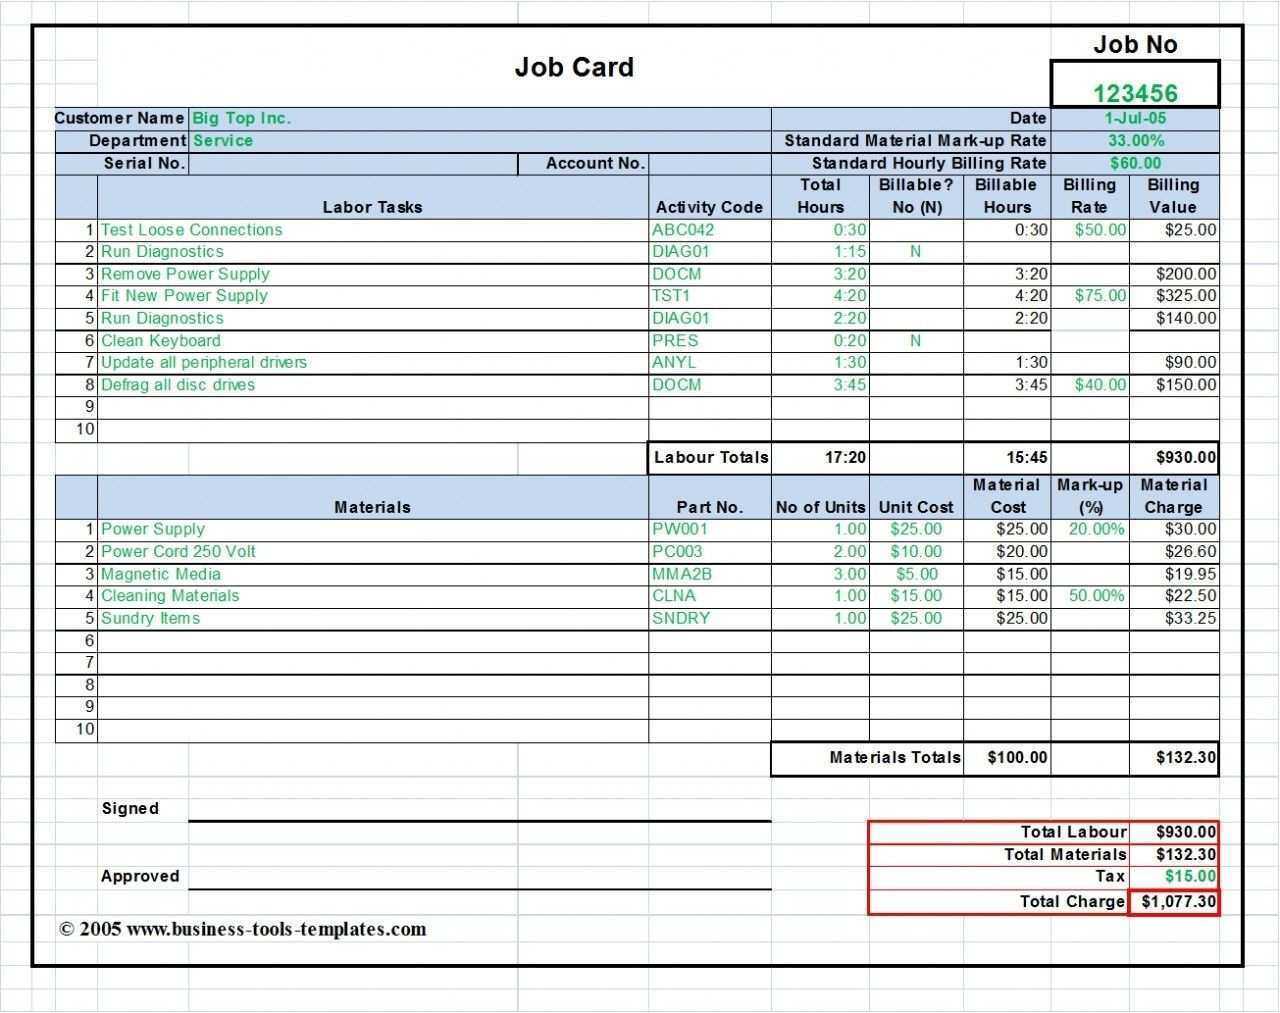 23 Blank Job Card Template Word For Ms Word For Job Card Throughout Rate Card Template Word